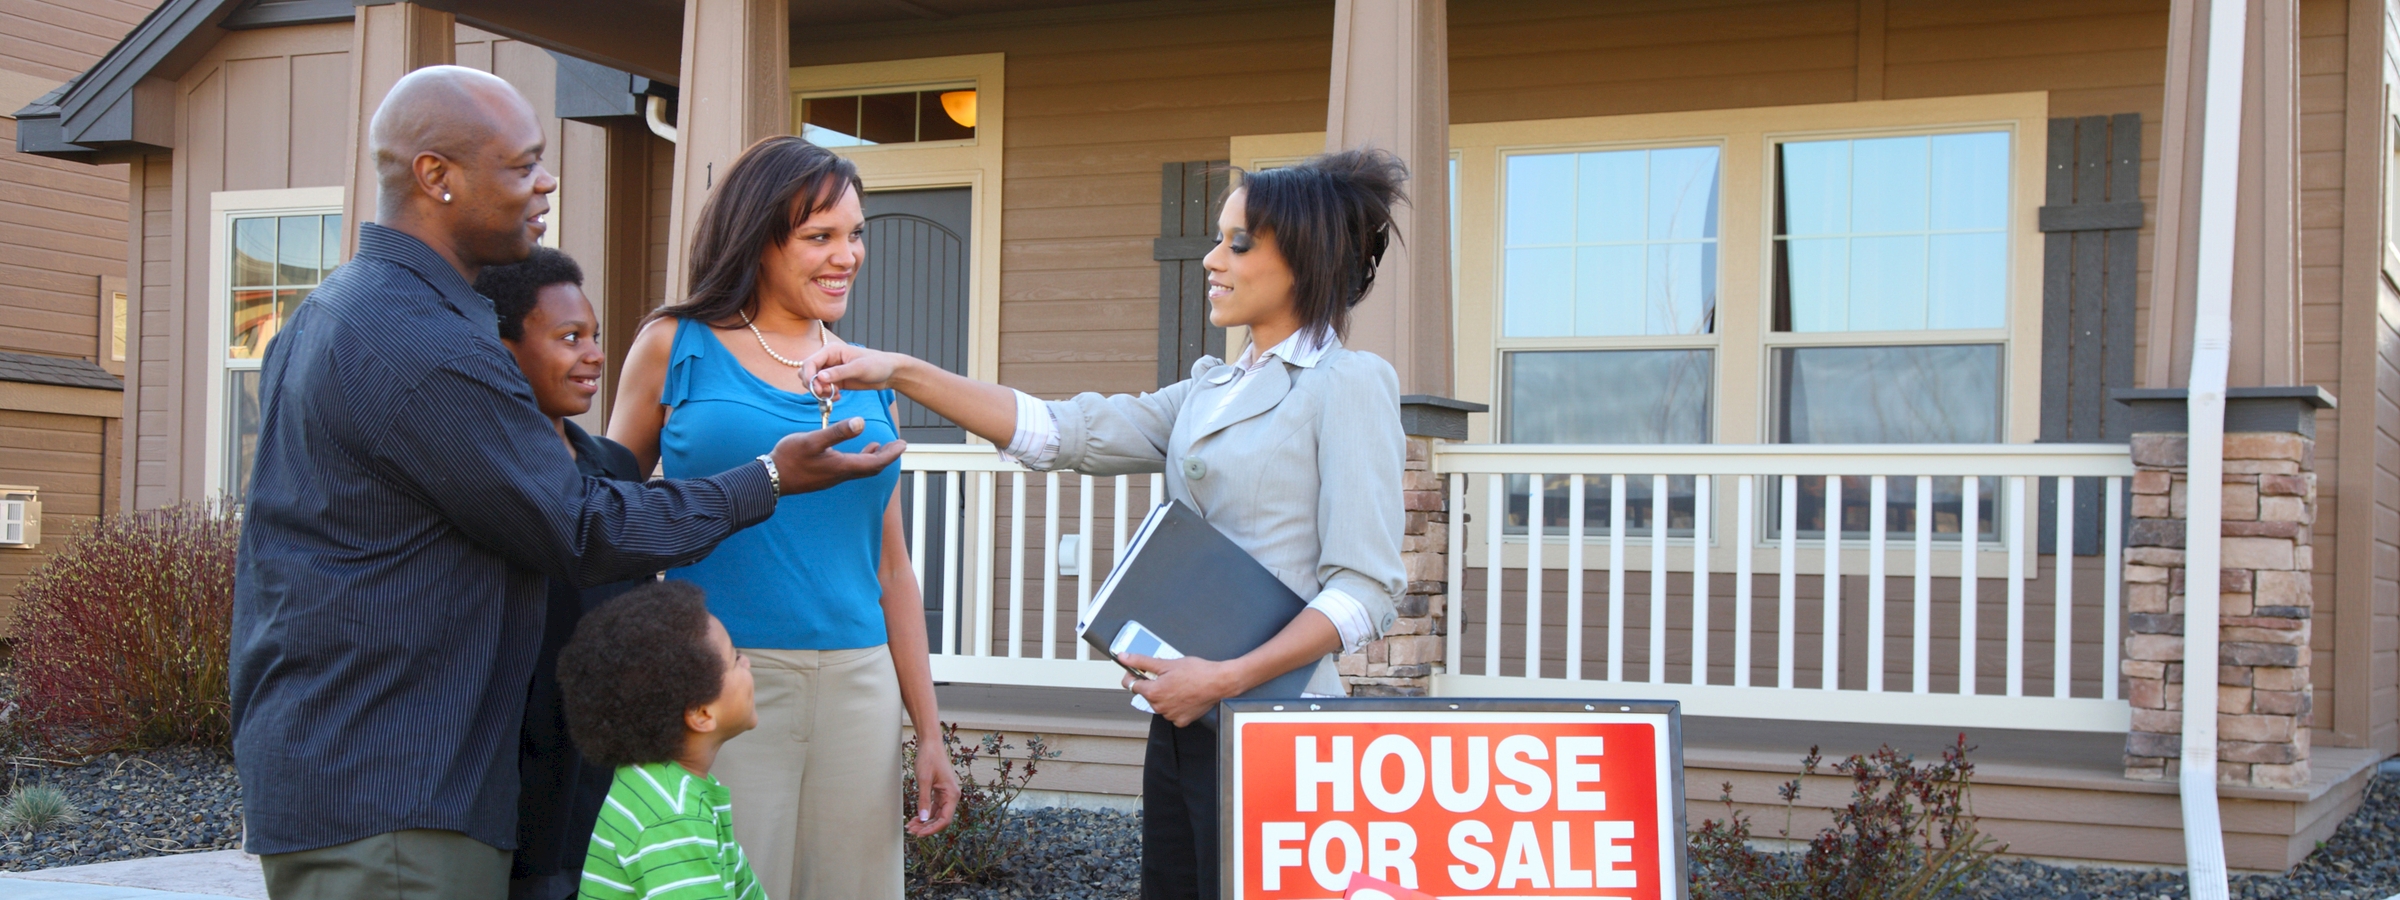 How Selling Your Home on a Website Streamlines the Process from Listing to Closing